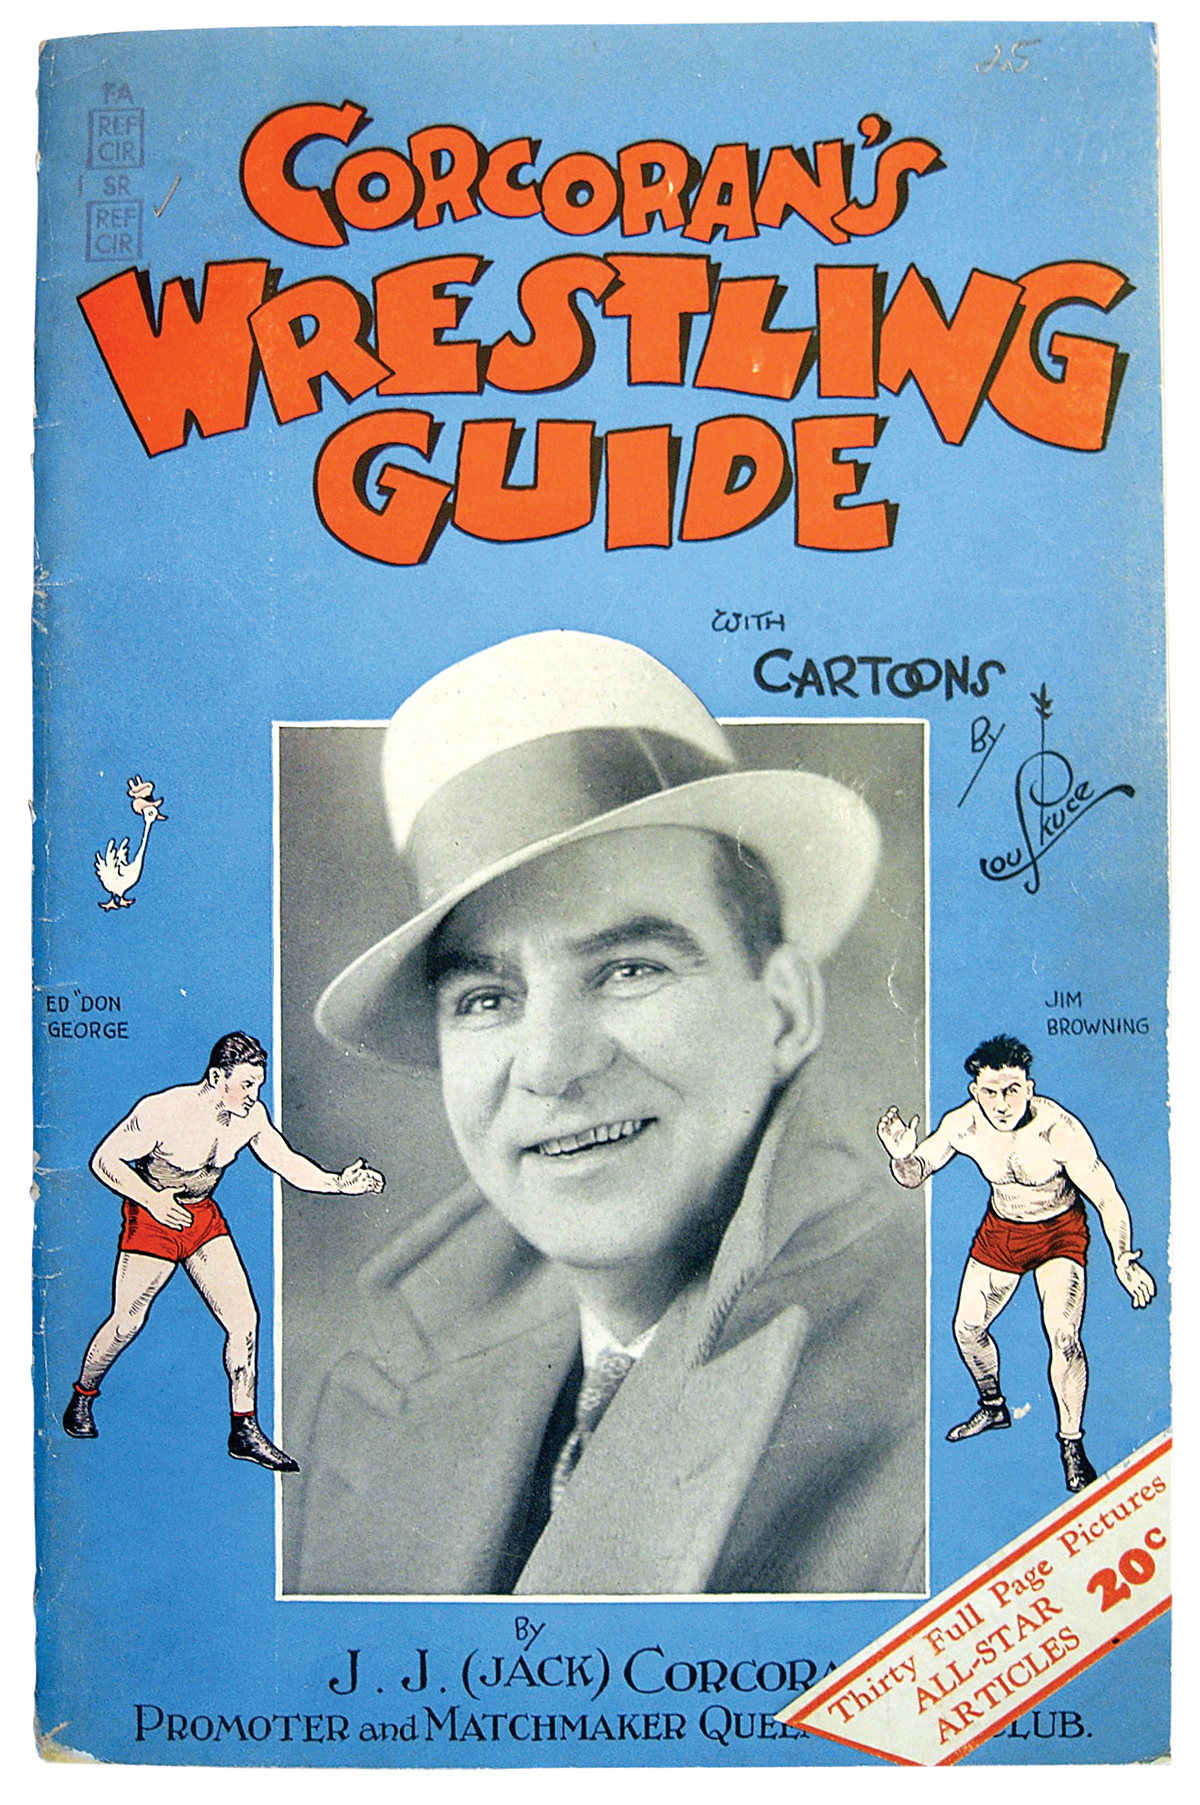 Photo of Corcoran's Wrestling Guide